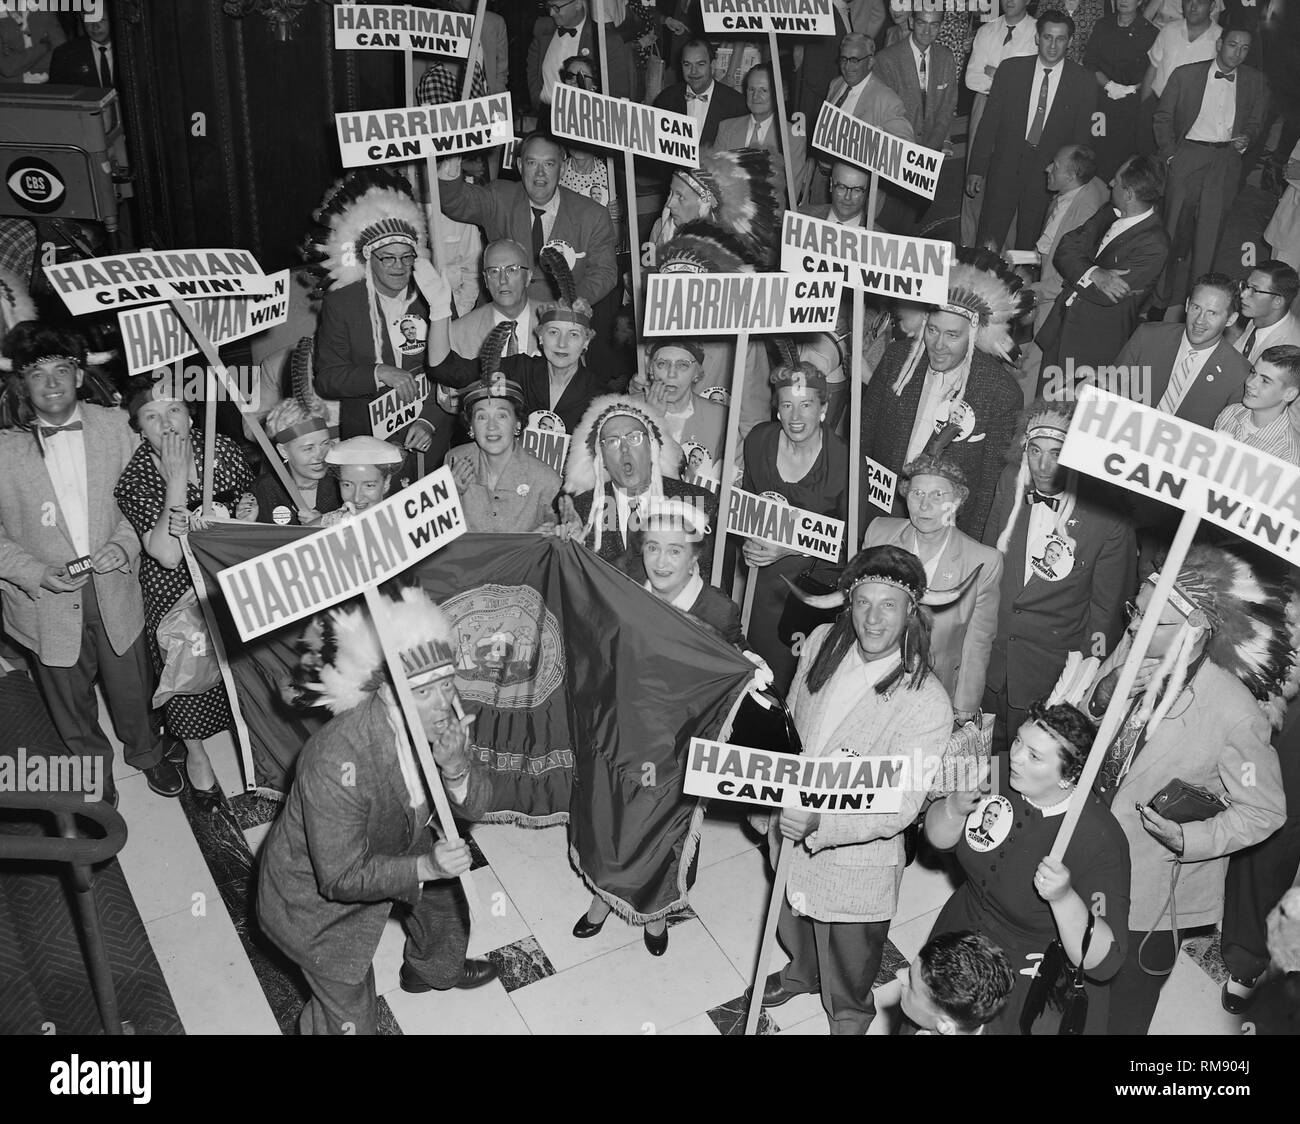 A group of delegates from Idaho at Chicago's Blackstone Hotel dress up as Native Americans and put on a demonstration promoting New York Gov. Averell Harriman for the 1956 Democratic presidential nomination in Chicago. Stock Photo